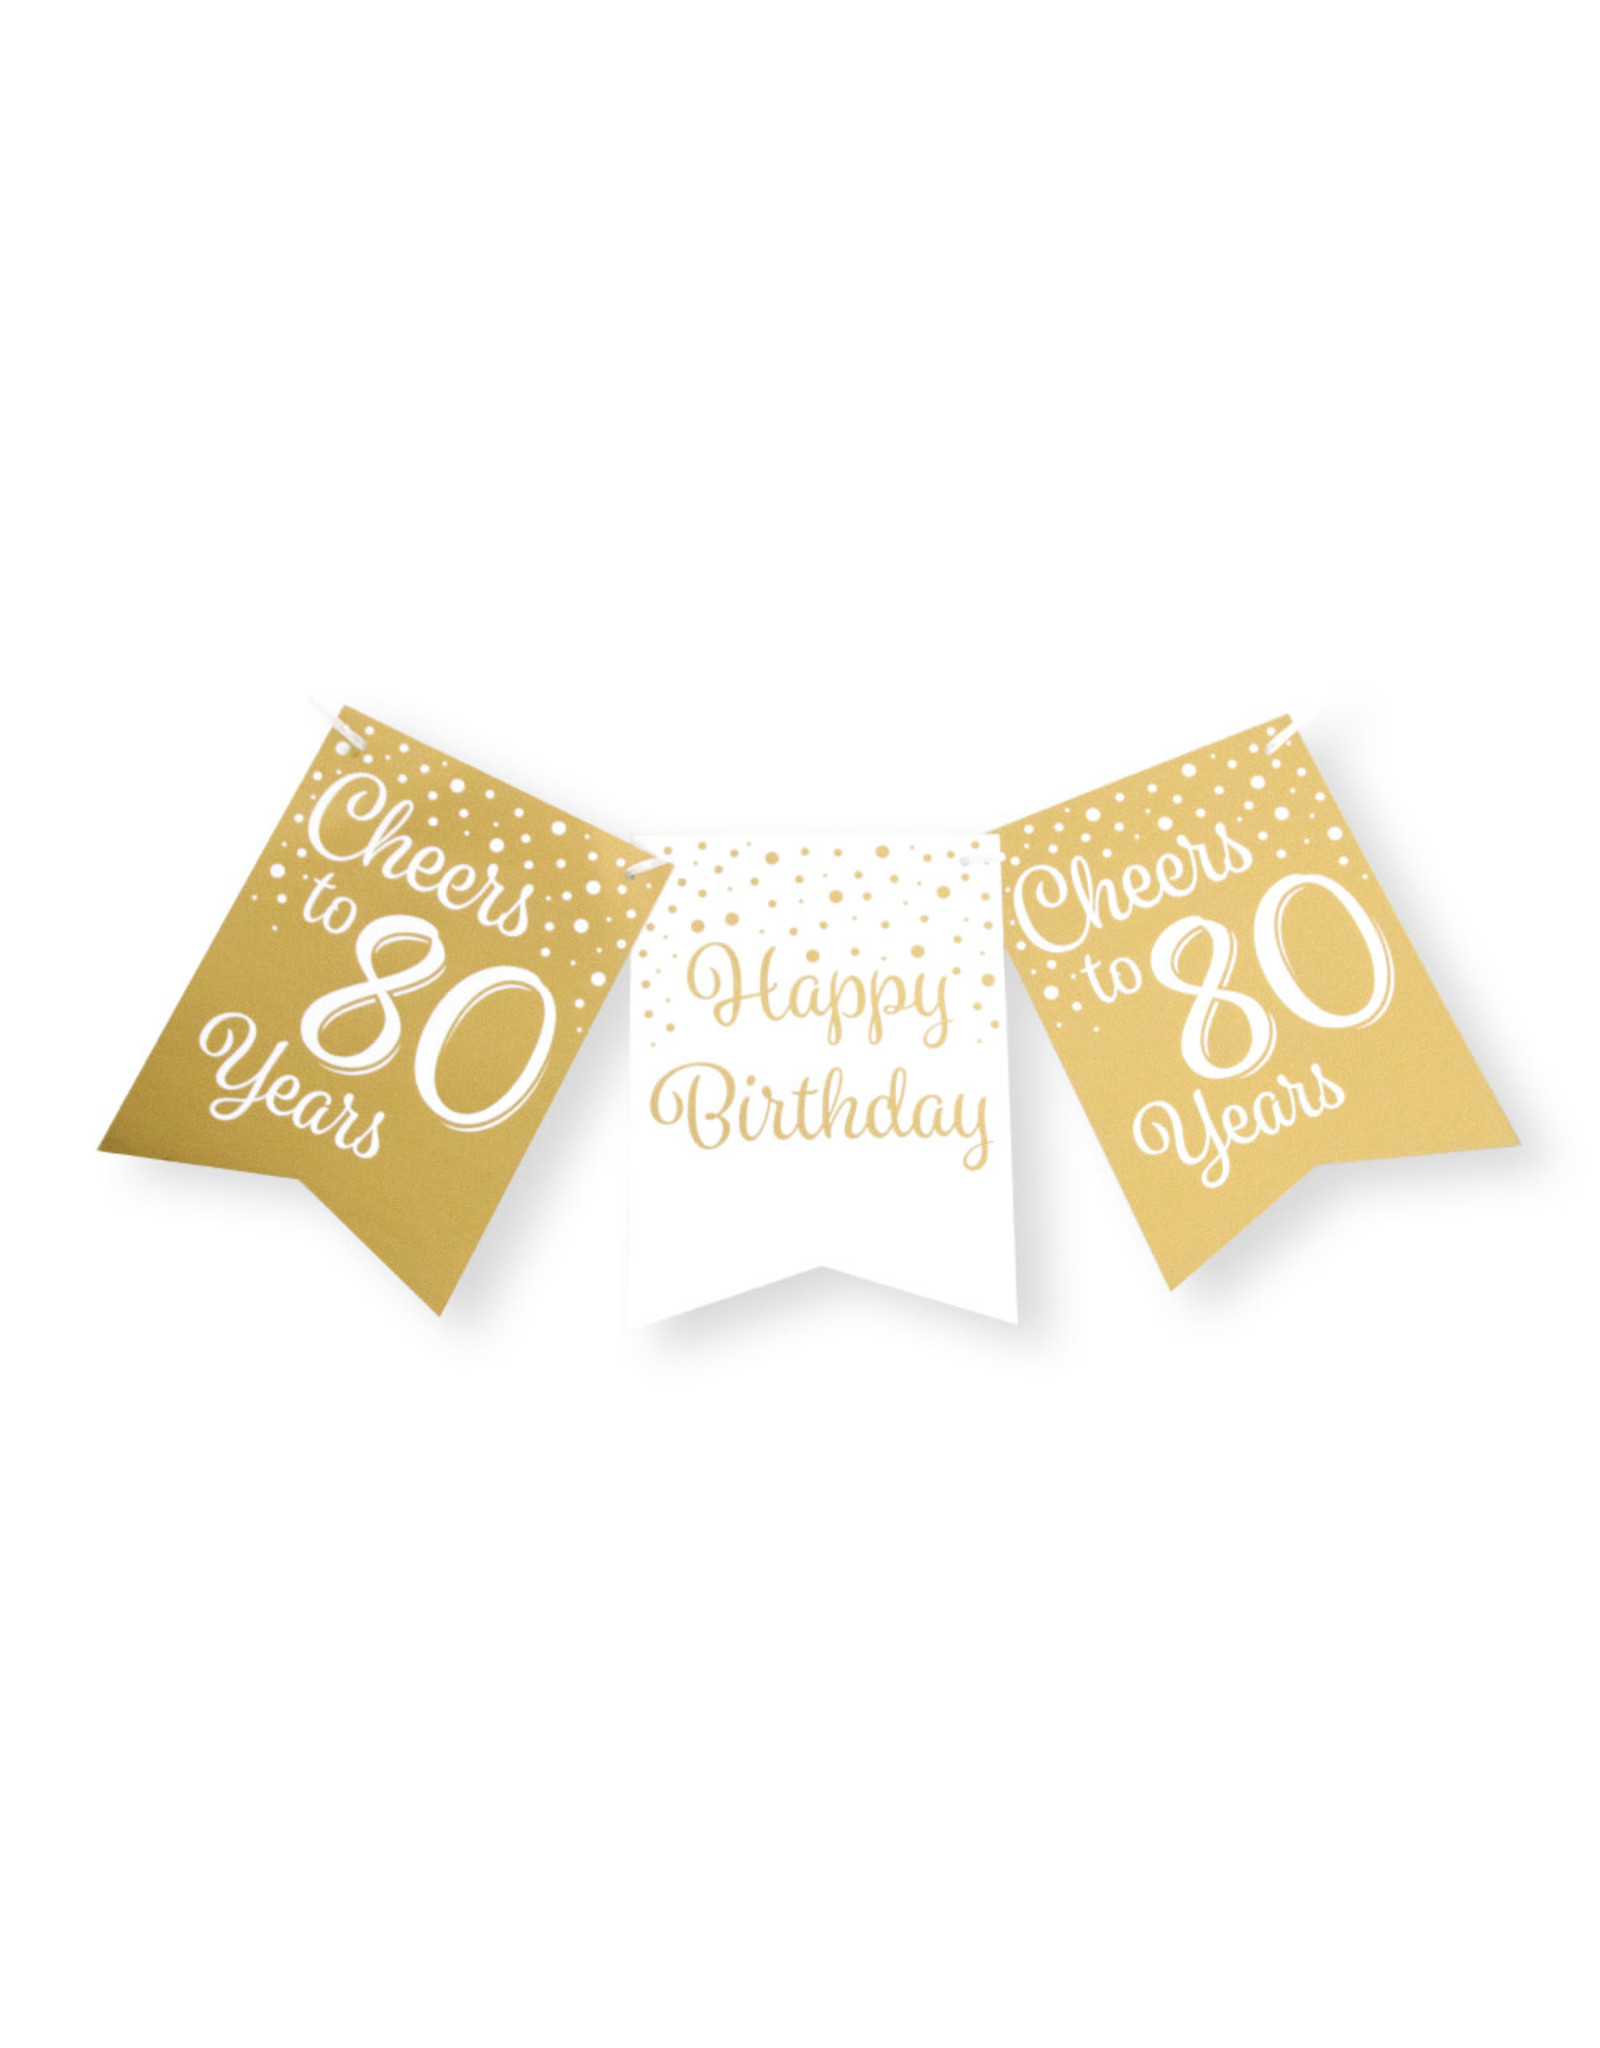 Party flag banner gold & white cheers to 80 years 6 meter